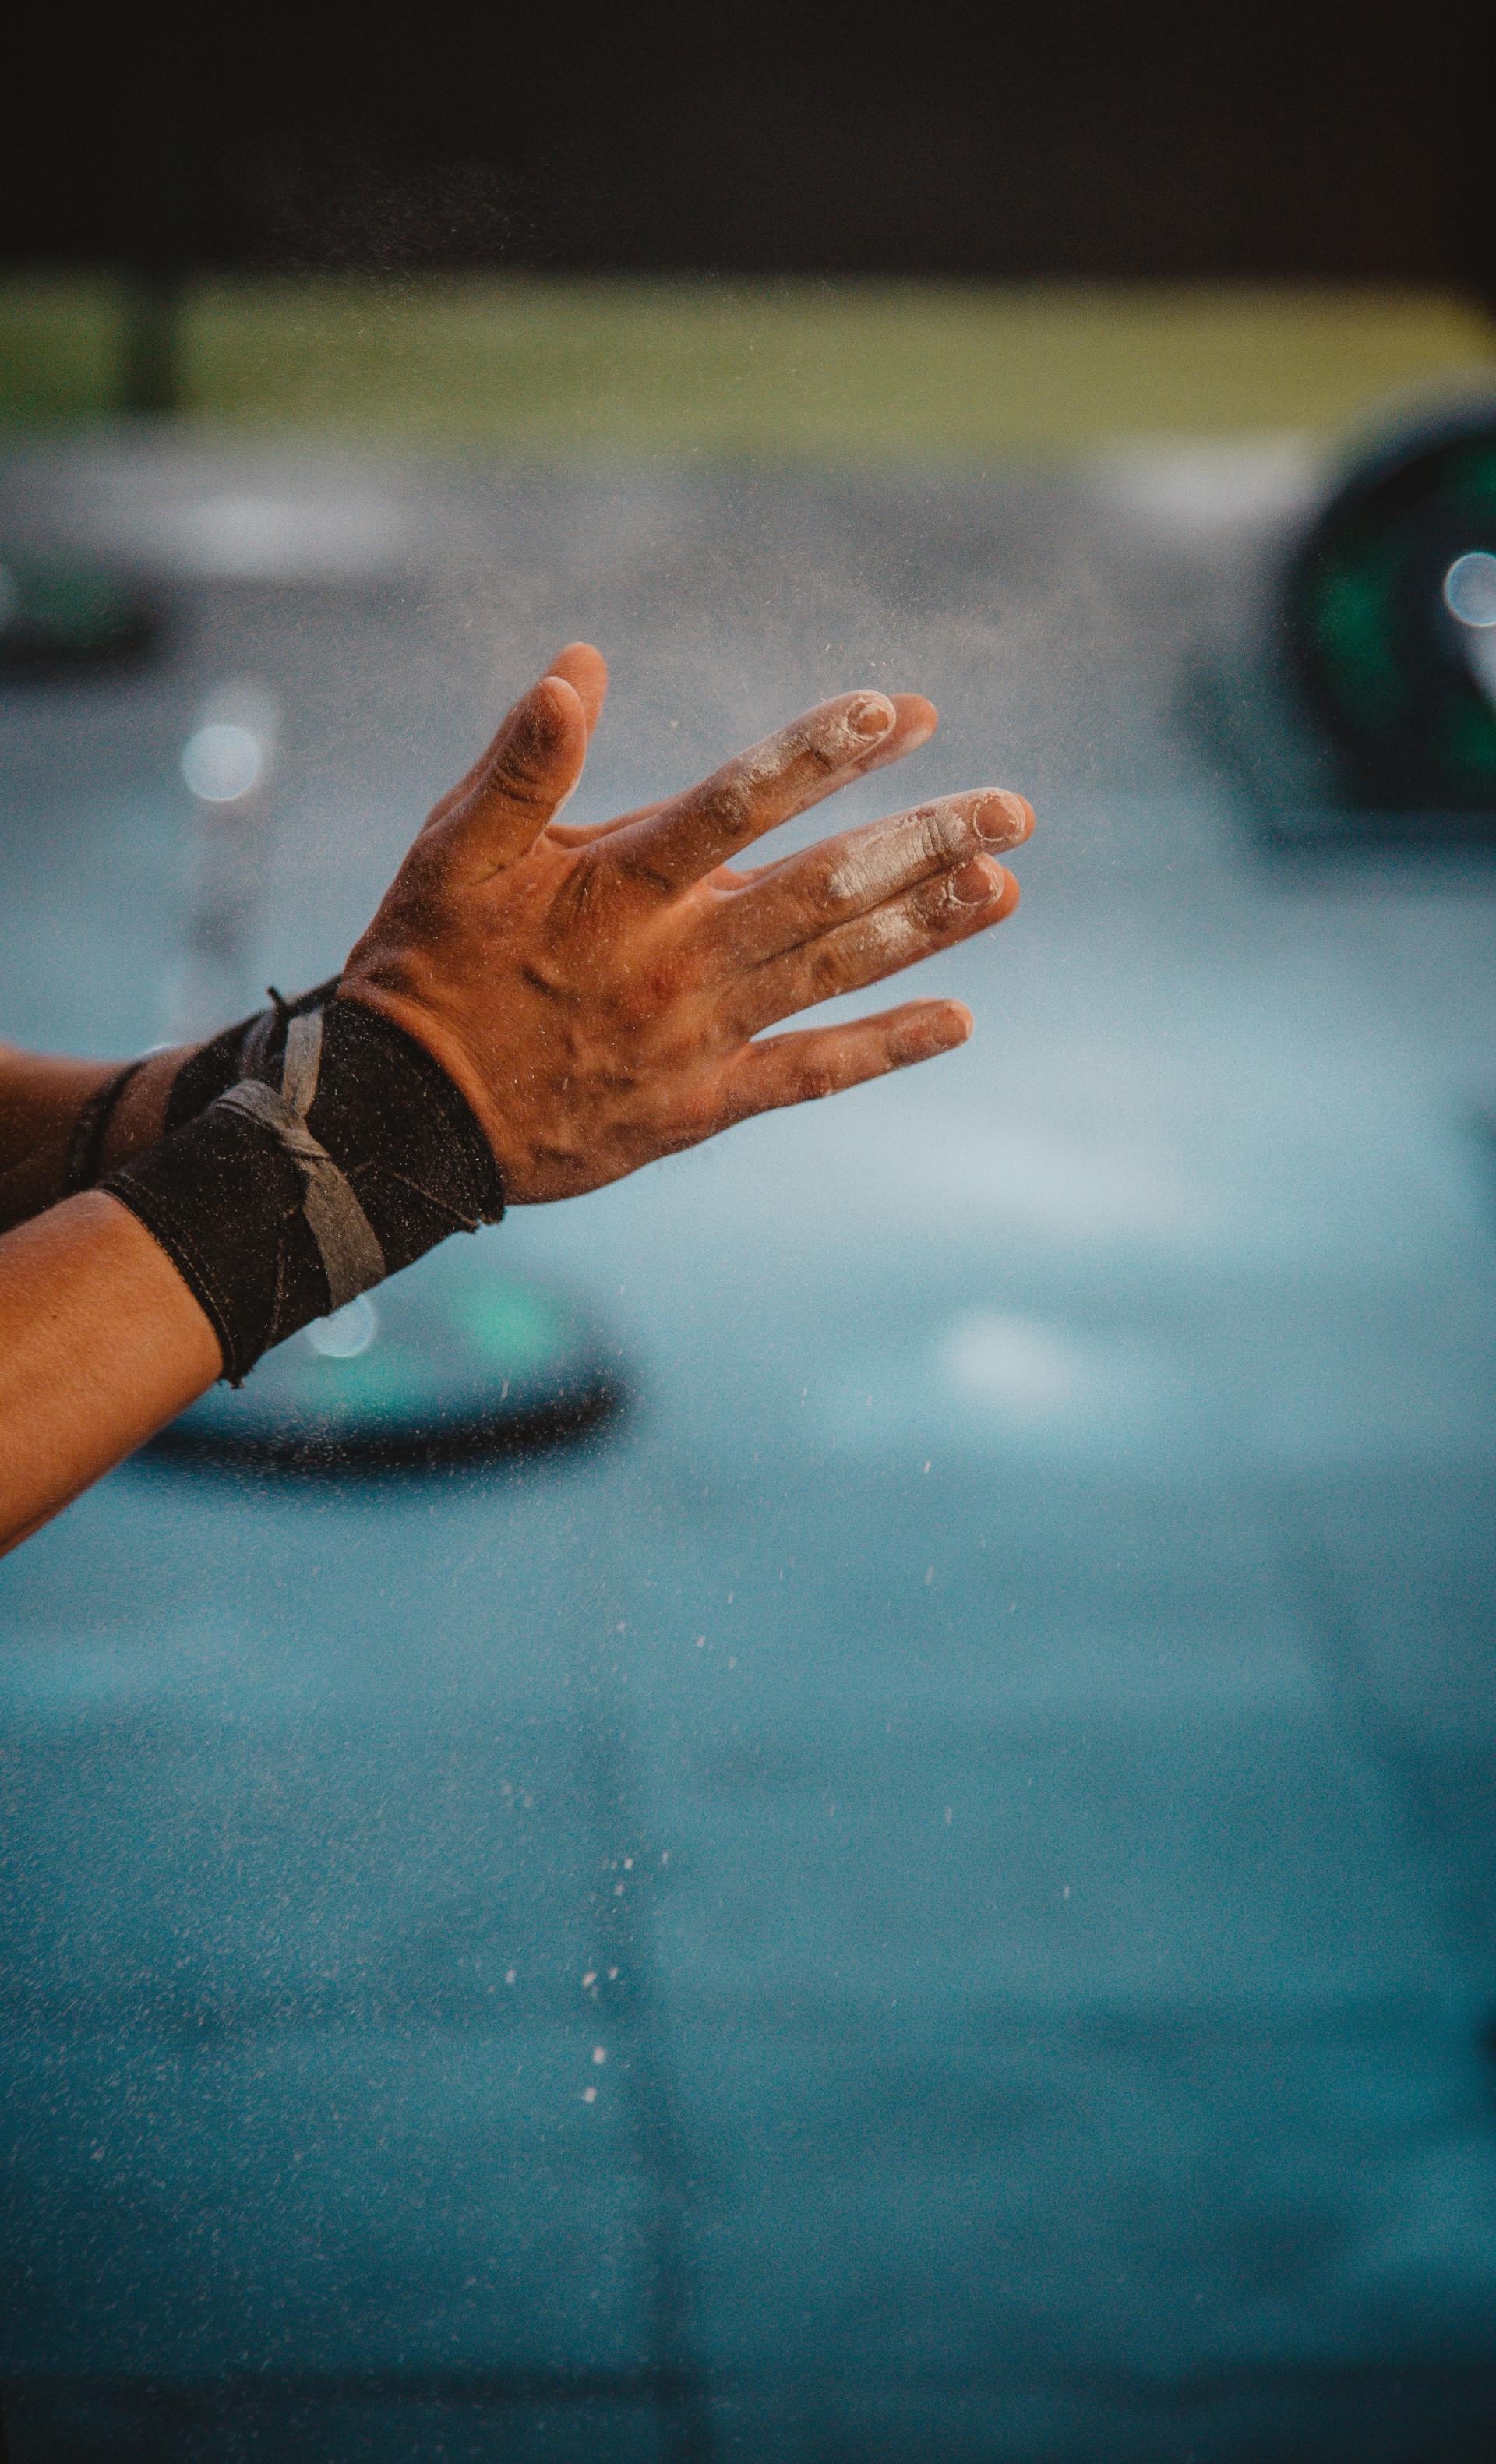 hands-clapping-with-chalk-with-wrists-wrapped-for-proper-form-for-a-crossfit-workout